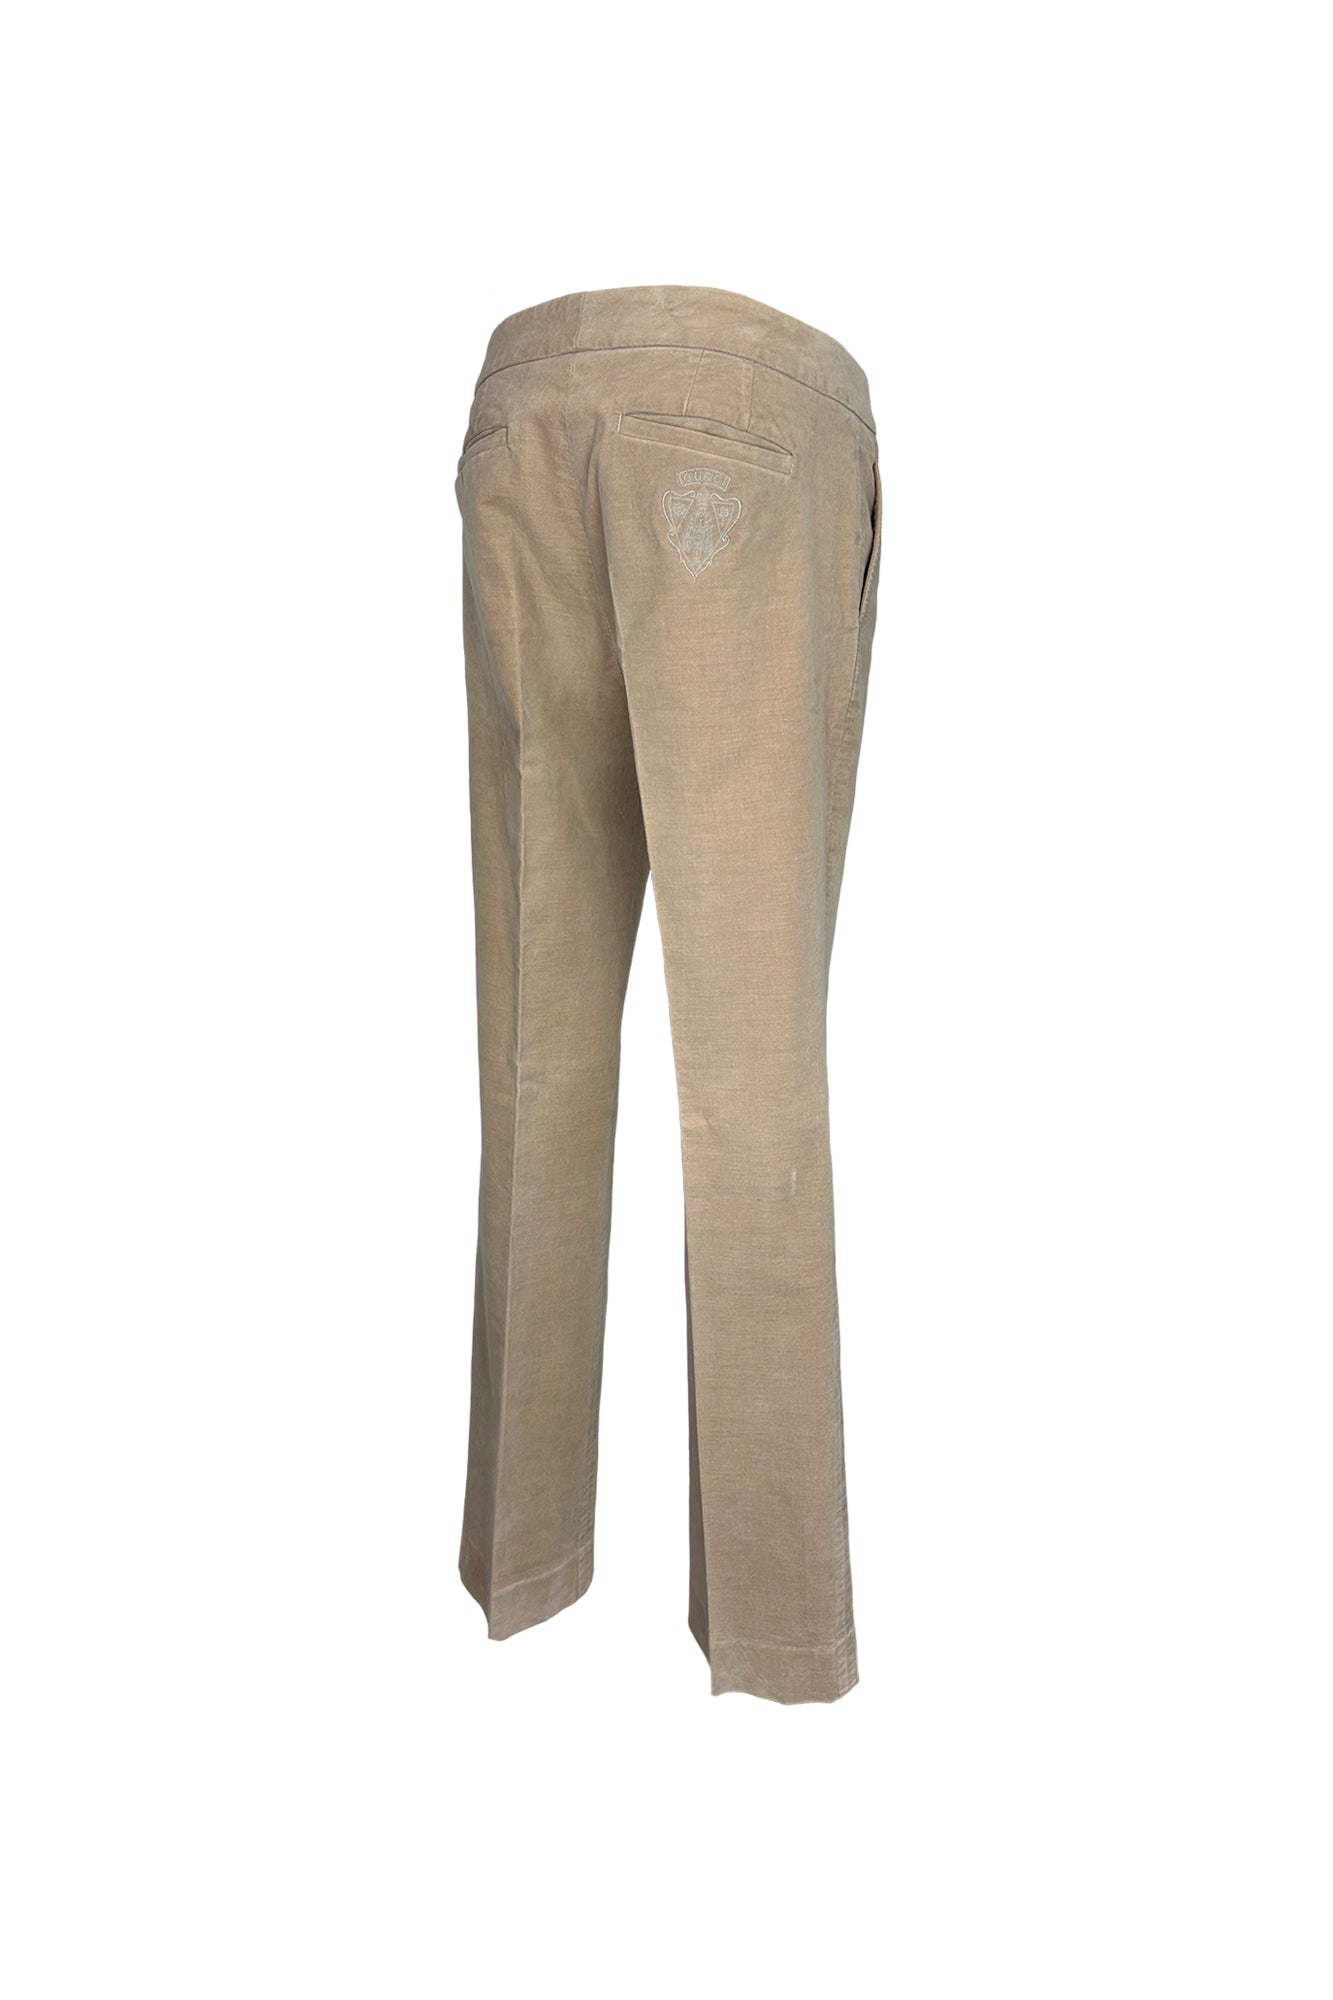 GUCCI 2006 TROUSERS